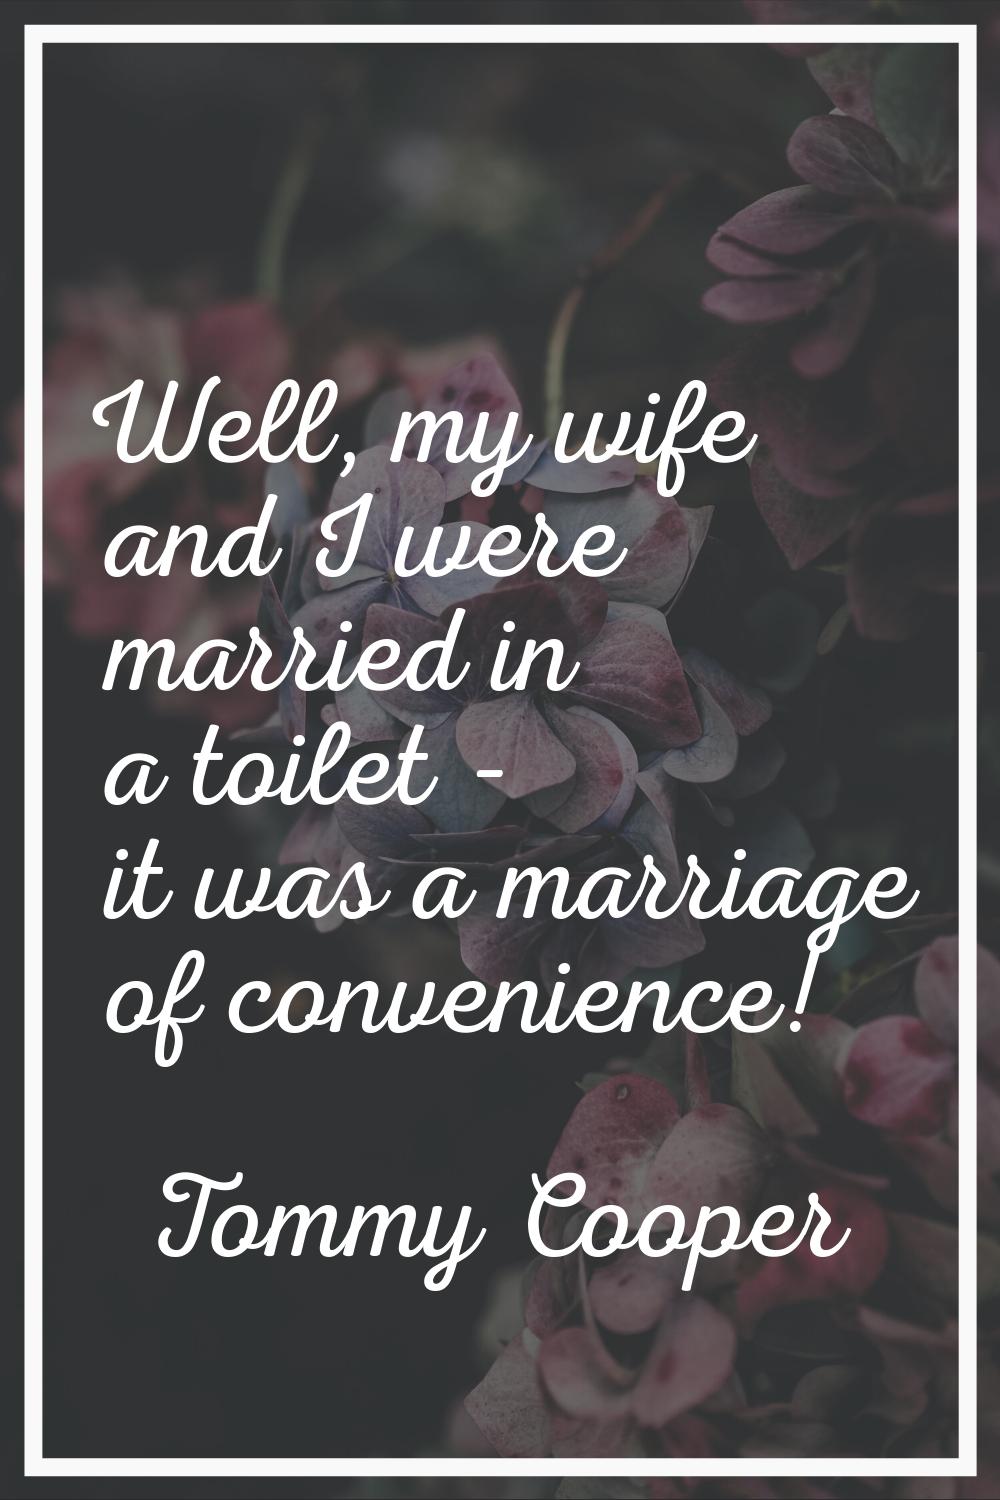 Well, my wife and I were married in a toilet - it was a marriage of convenience!